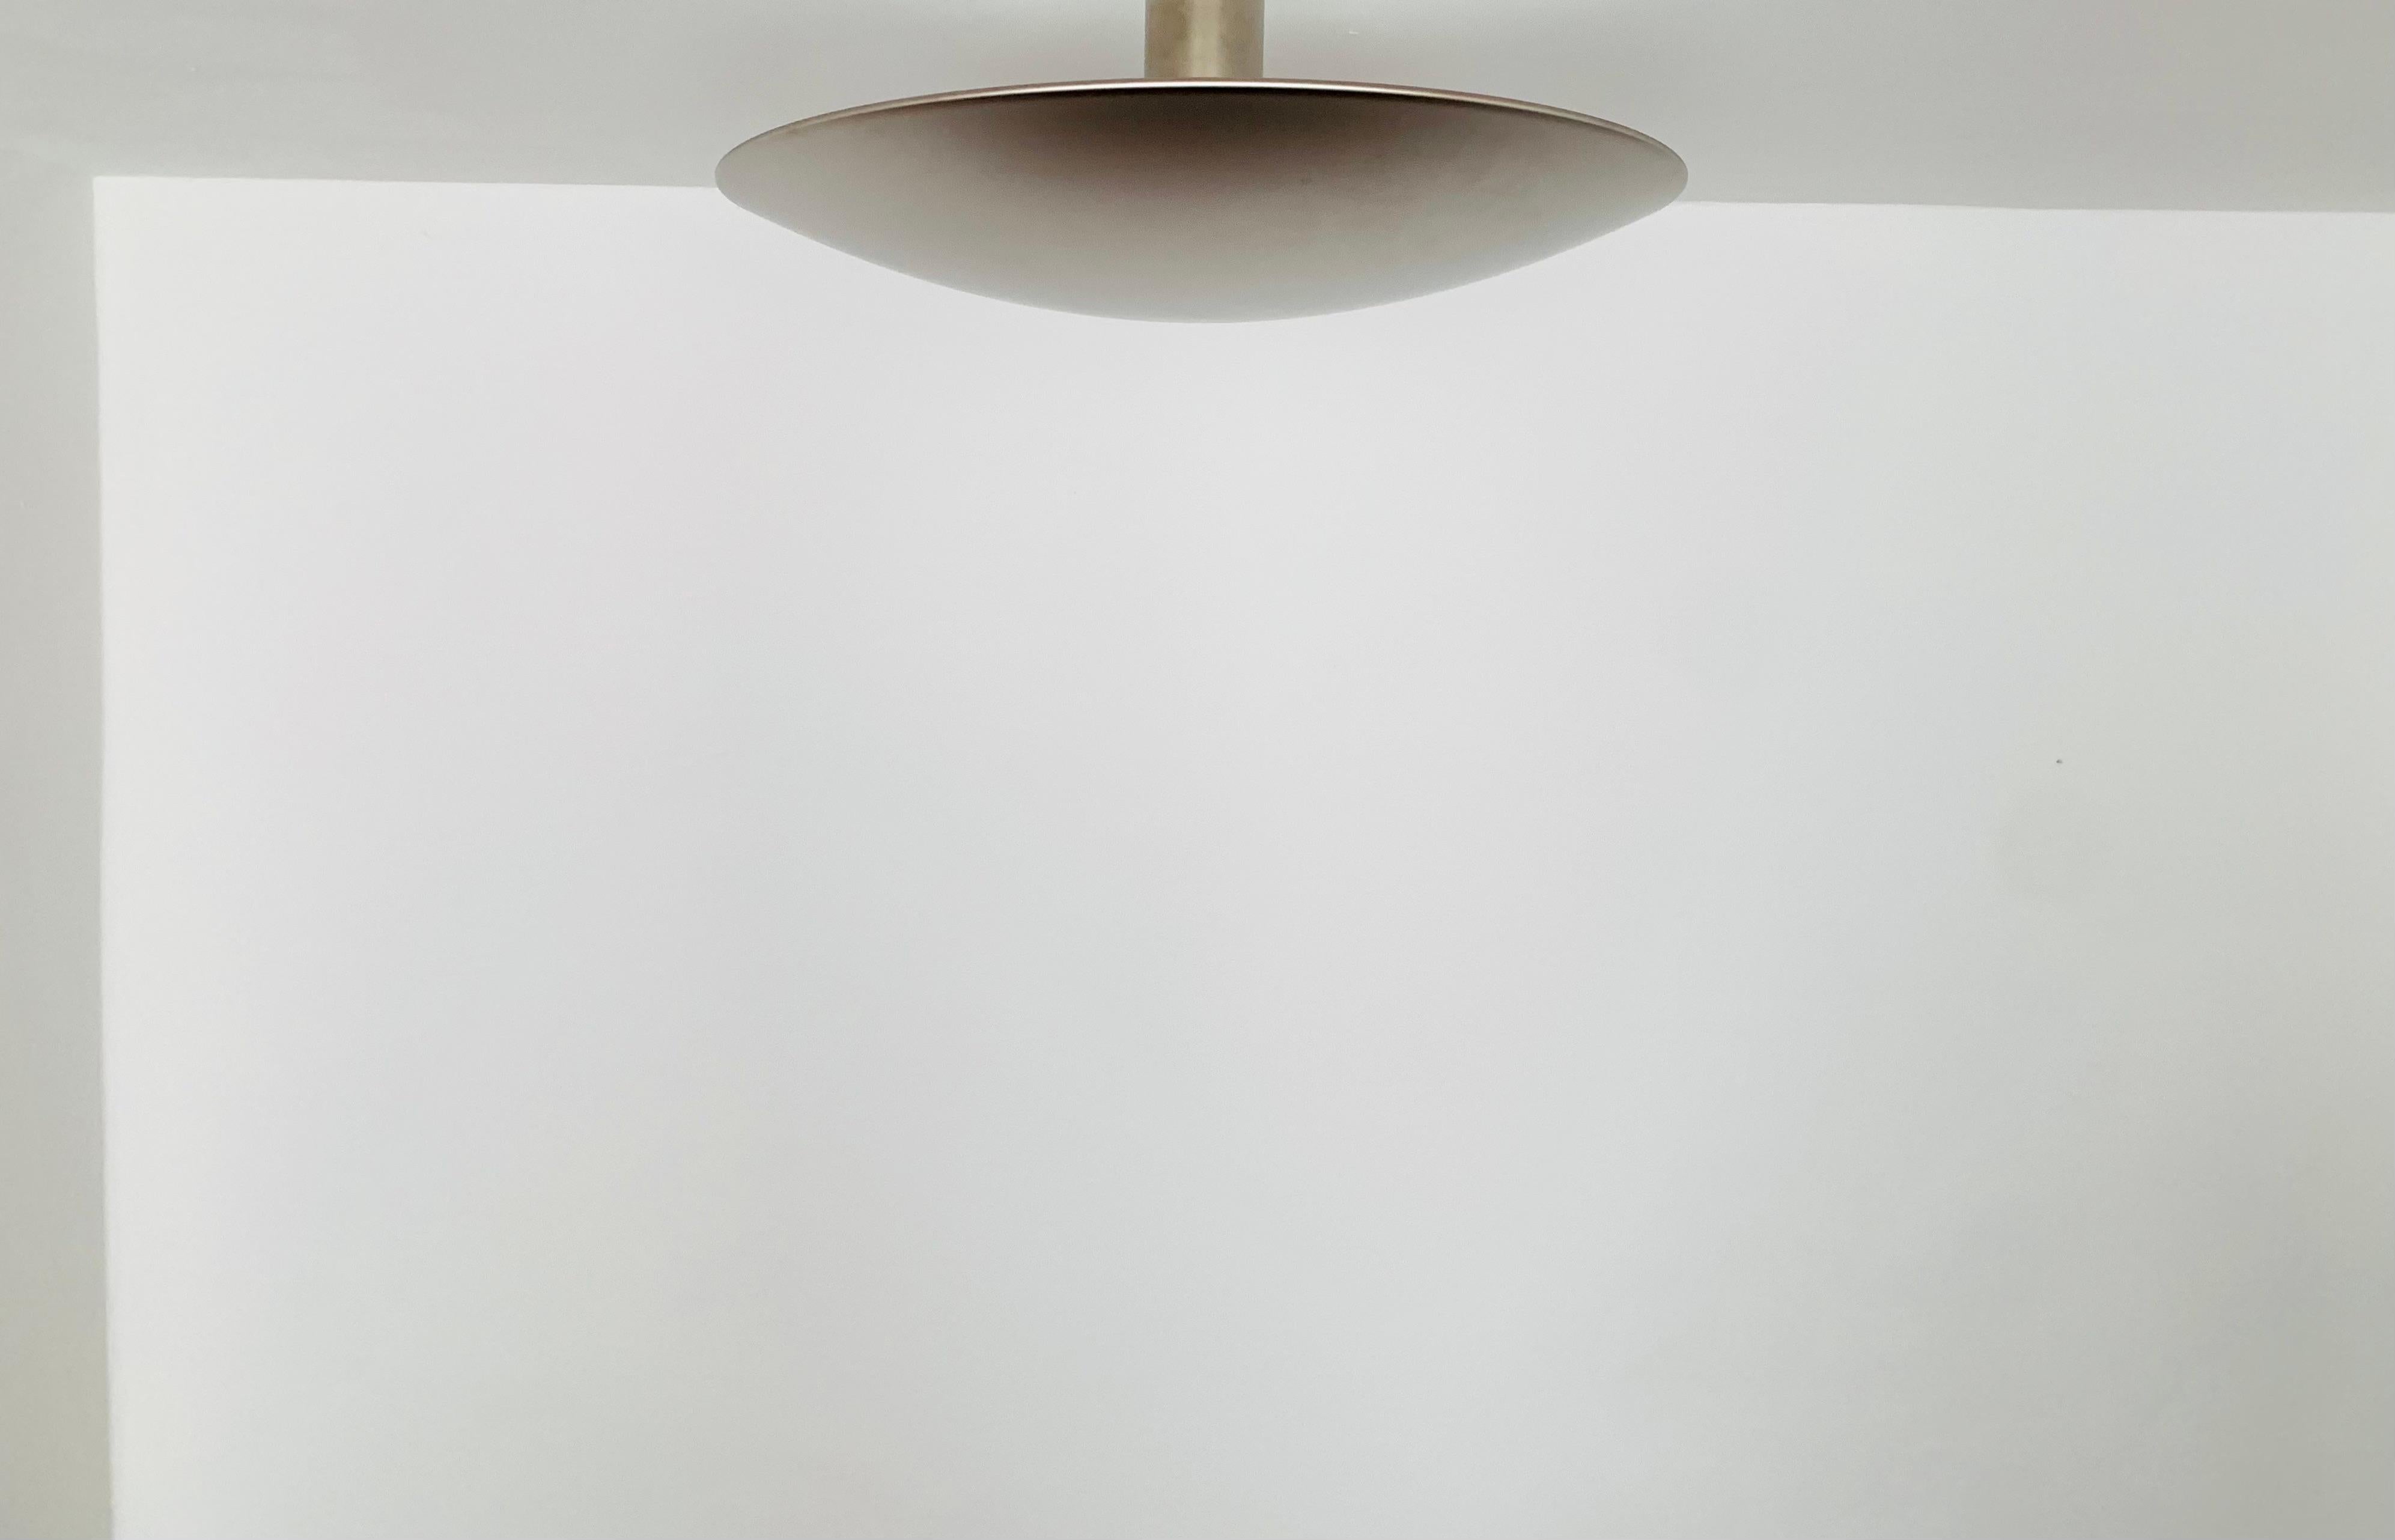 Very nice wall or ceiling lamp from the 1970s.
The lighting effect of the lamp is extremely beautiful.
The lamp creates a very cozy atmosphere and is of very high quality.

Design: Florian Schulz
Sela 55
Gela 55

Condition:

Very good vintage